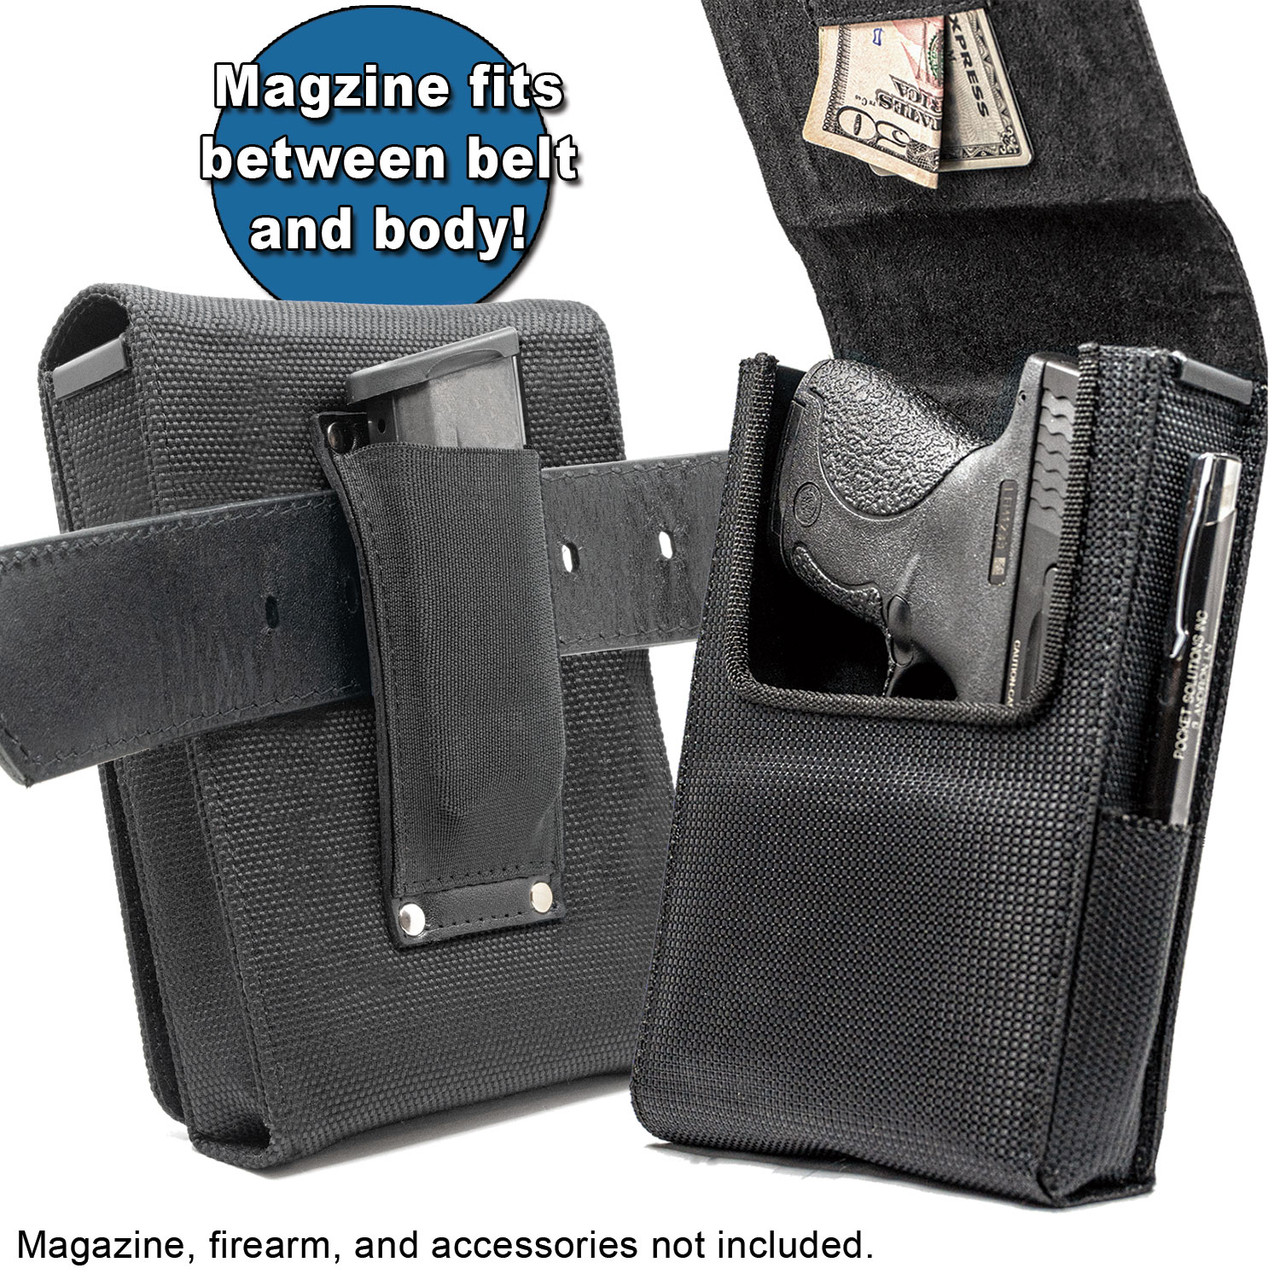 The Springfield XDE 9mm Max Defense Holster